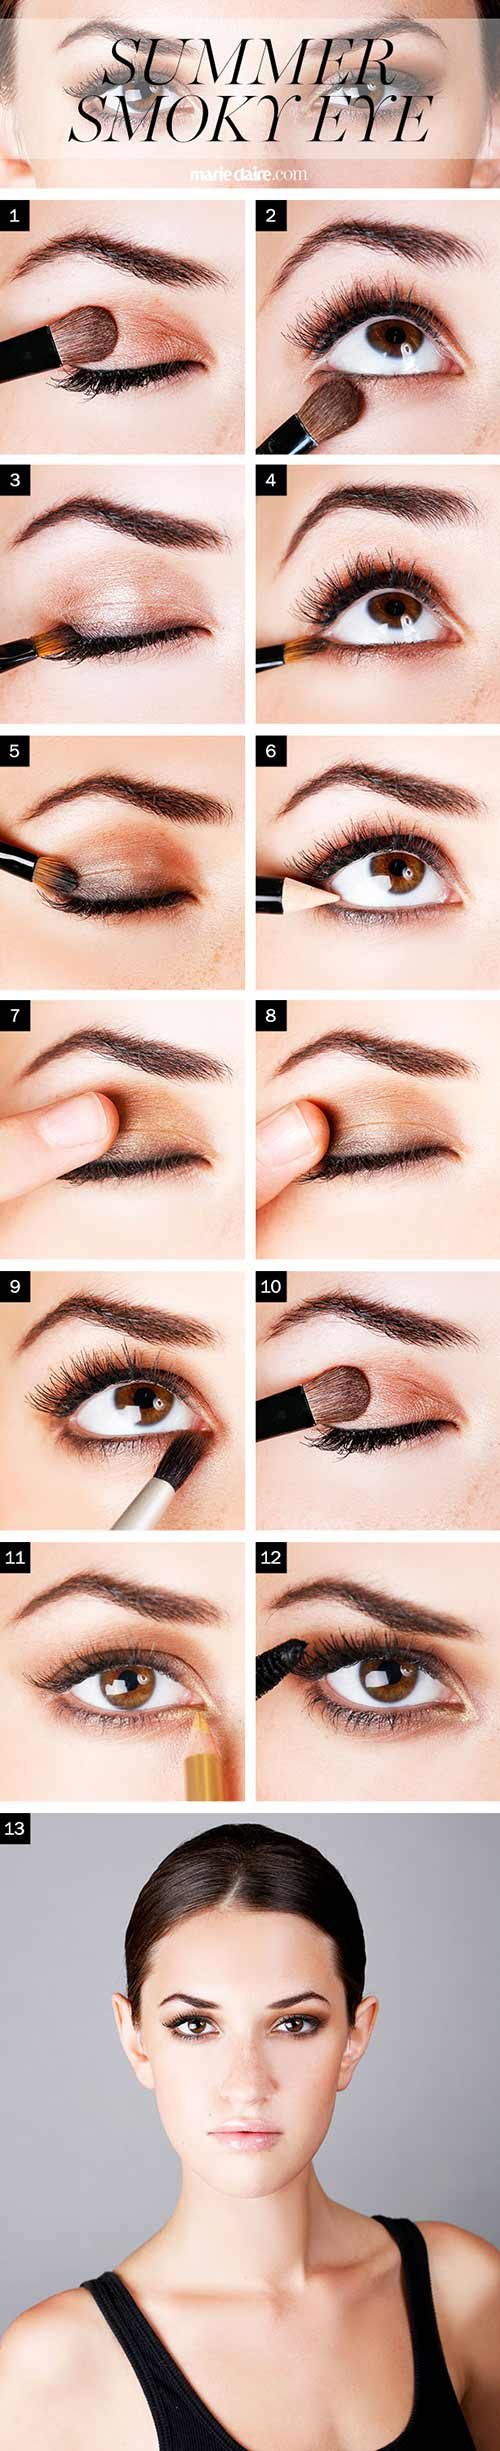 Eye Makeup Step By Step Instructions With Pictures How To Do Smokey Eye Makeup Top 10 Tutorial Pictures For 2019